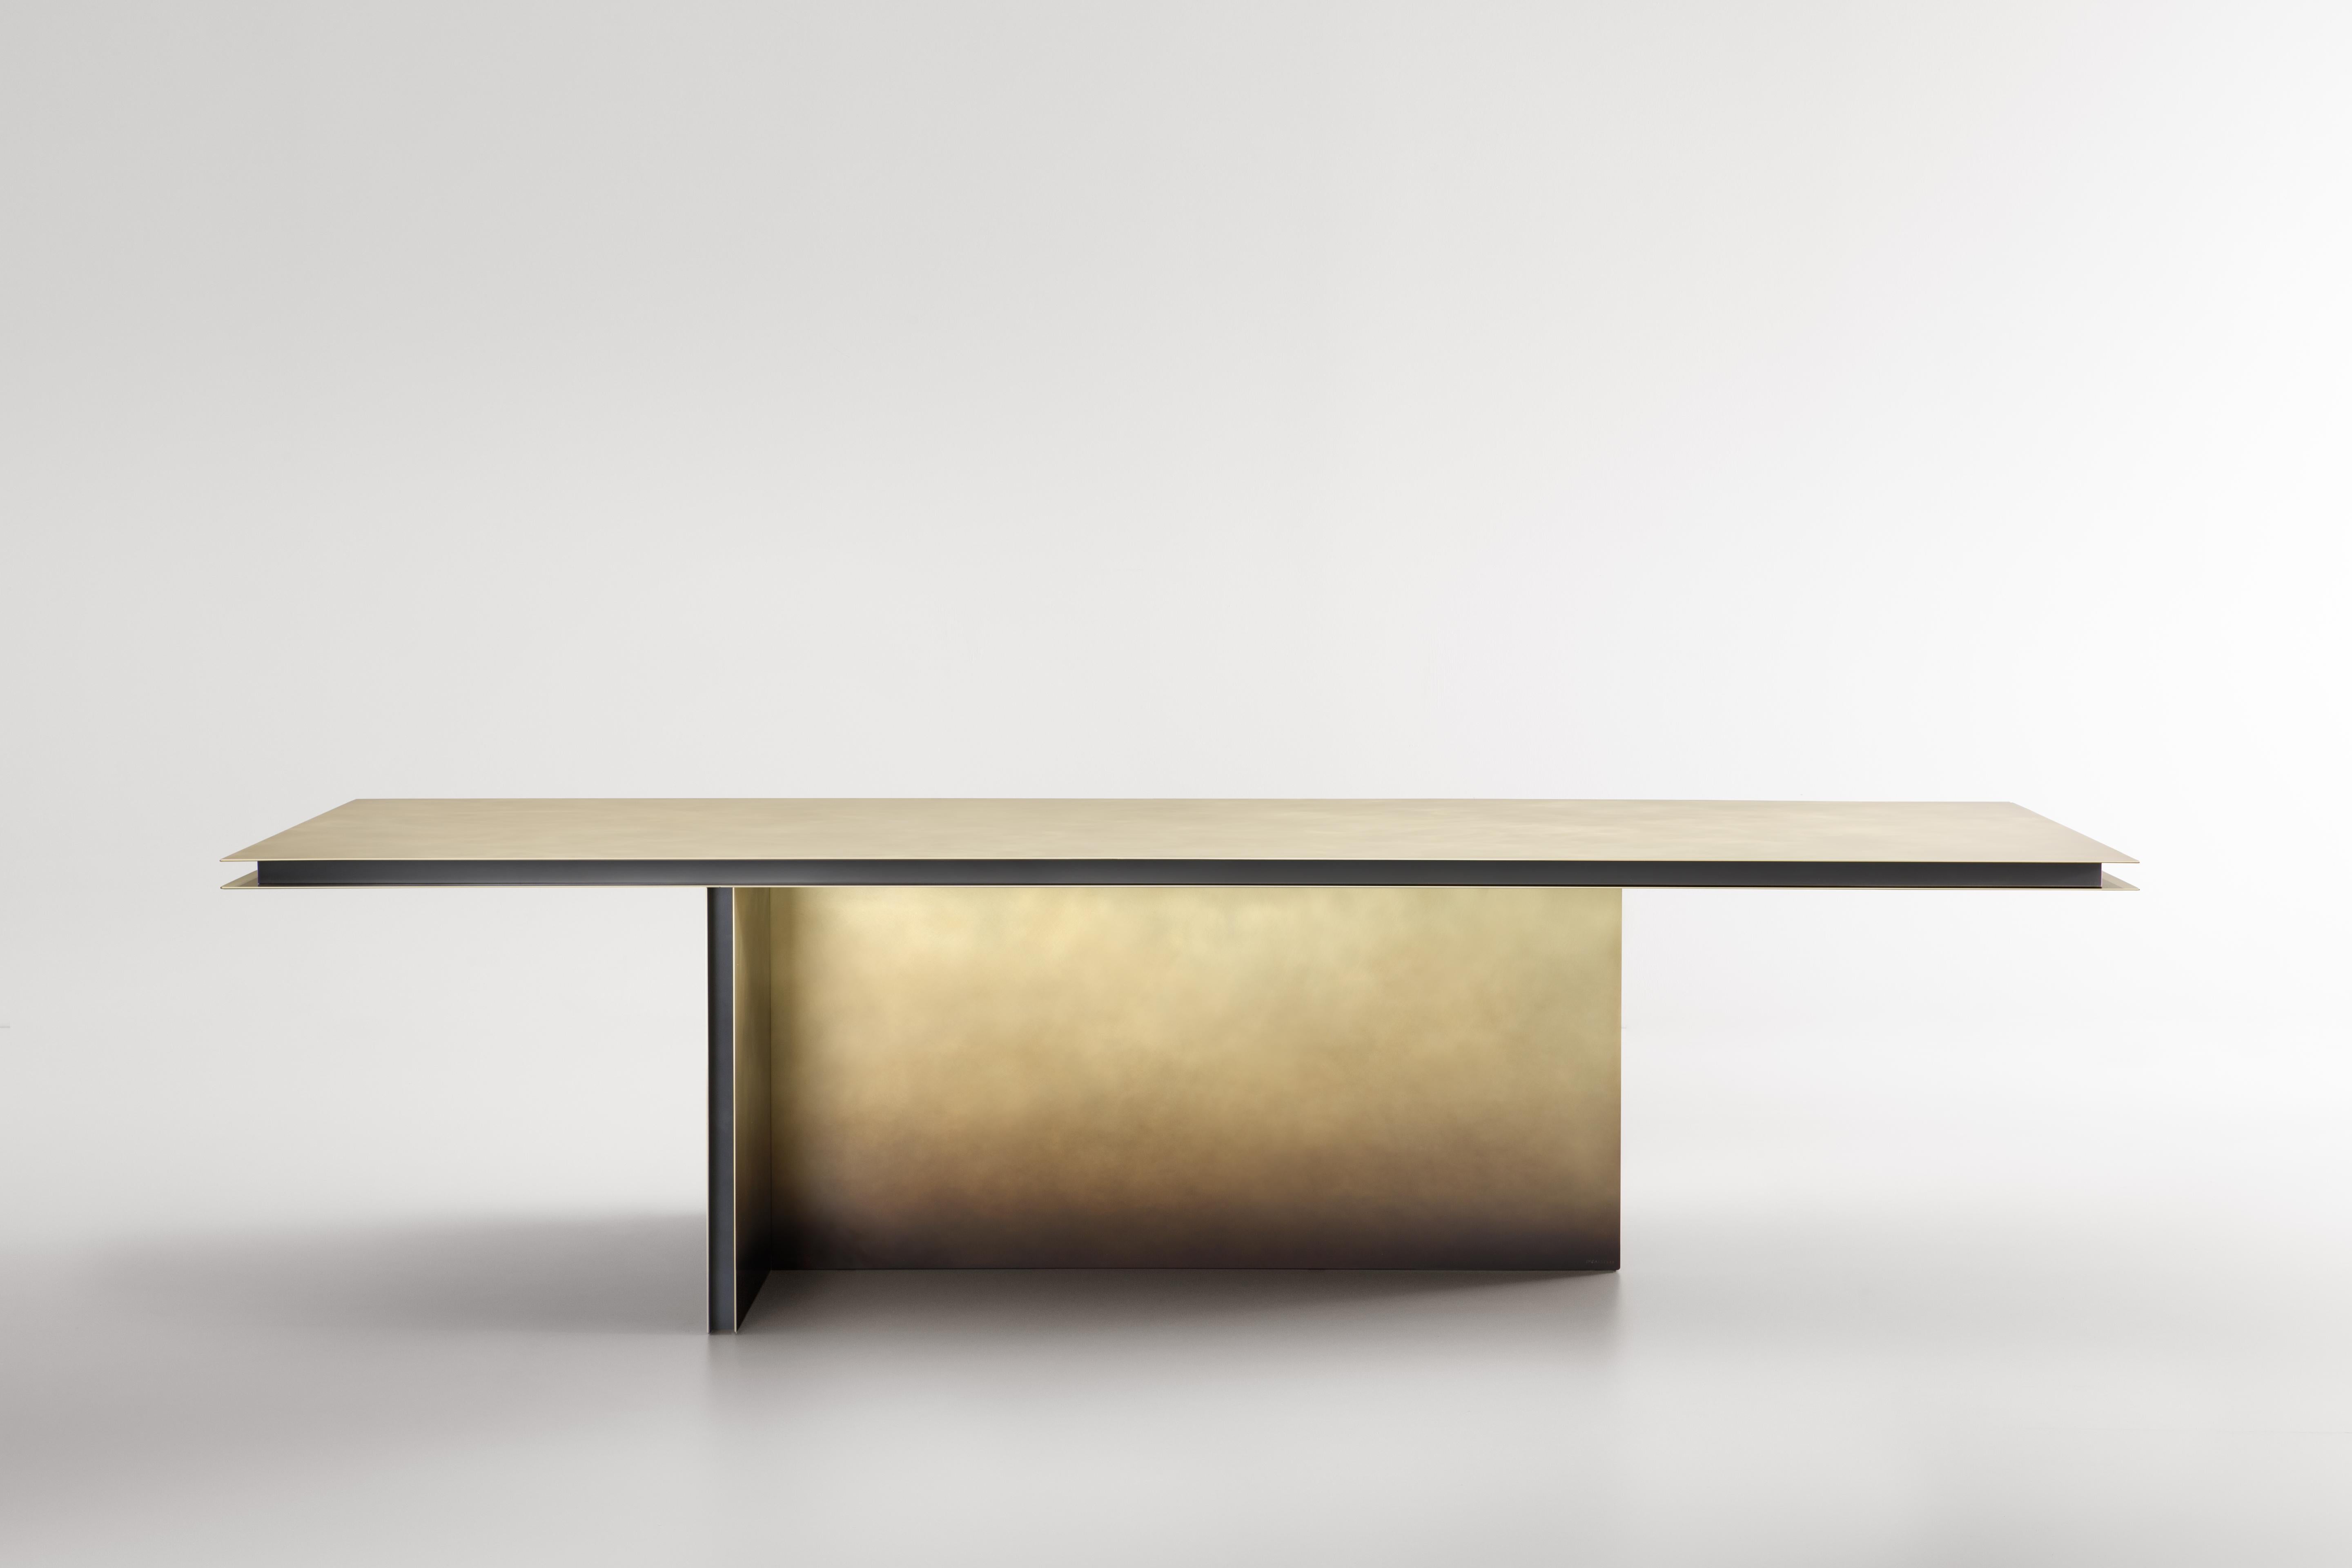 The Folio table is a pure, precise shape characterised by perpendicular planes of metal sheet. A rational sculpture that, thanks to the strength of its aesthetics, exalts the material in perfectly reflective surfaces.
A scenic presence, as simple as